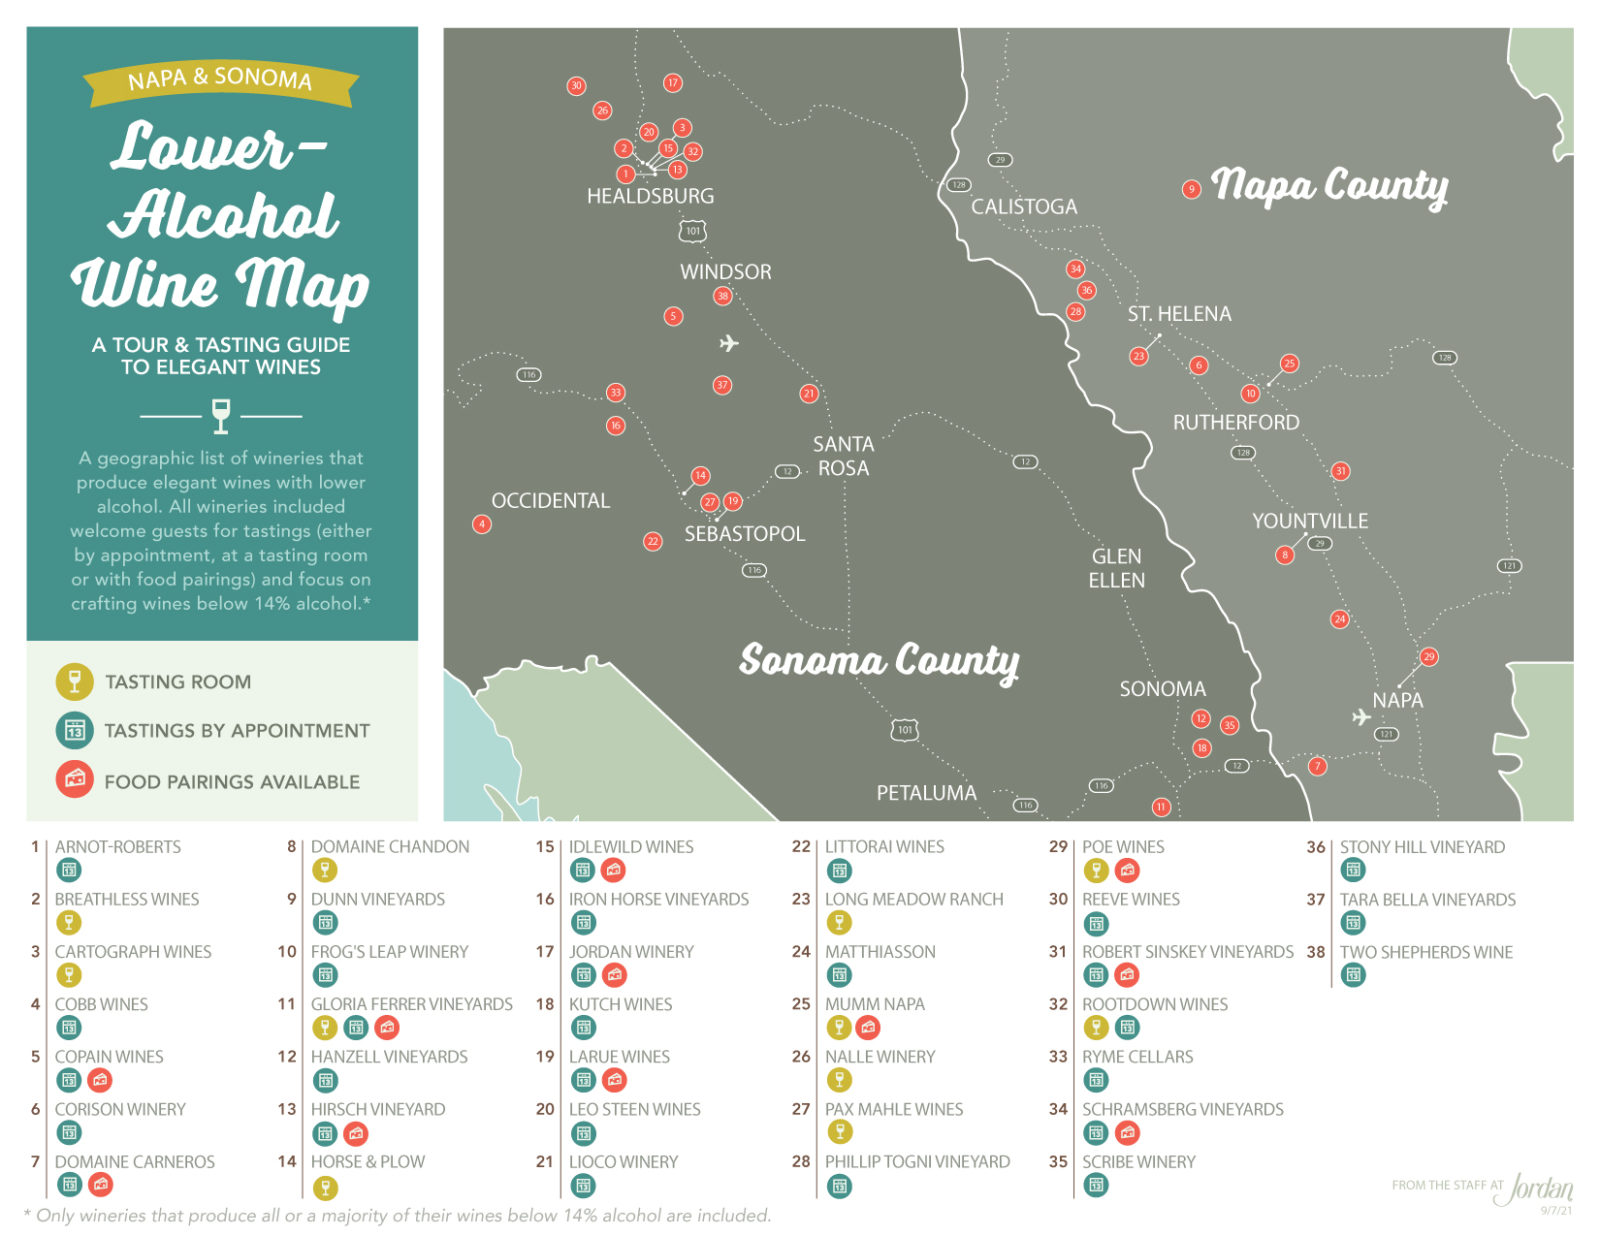 Image of Low Alcohol Winery Map in Napa and Sonoma